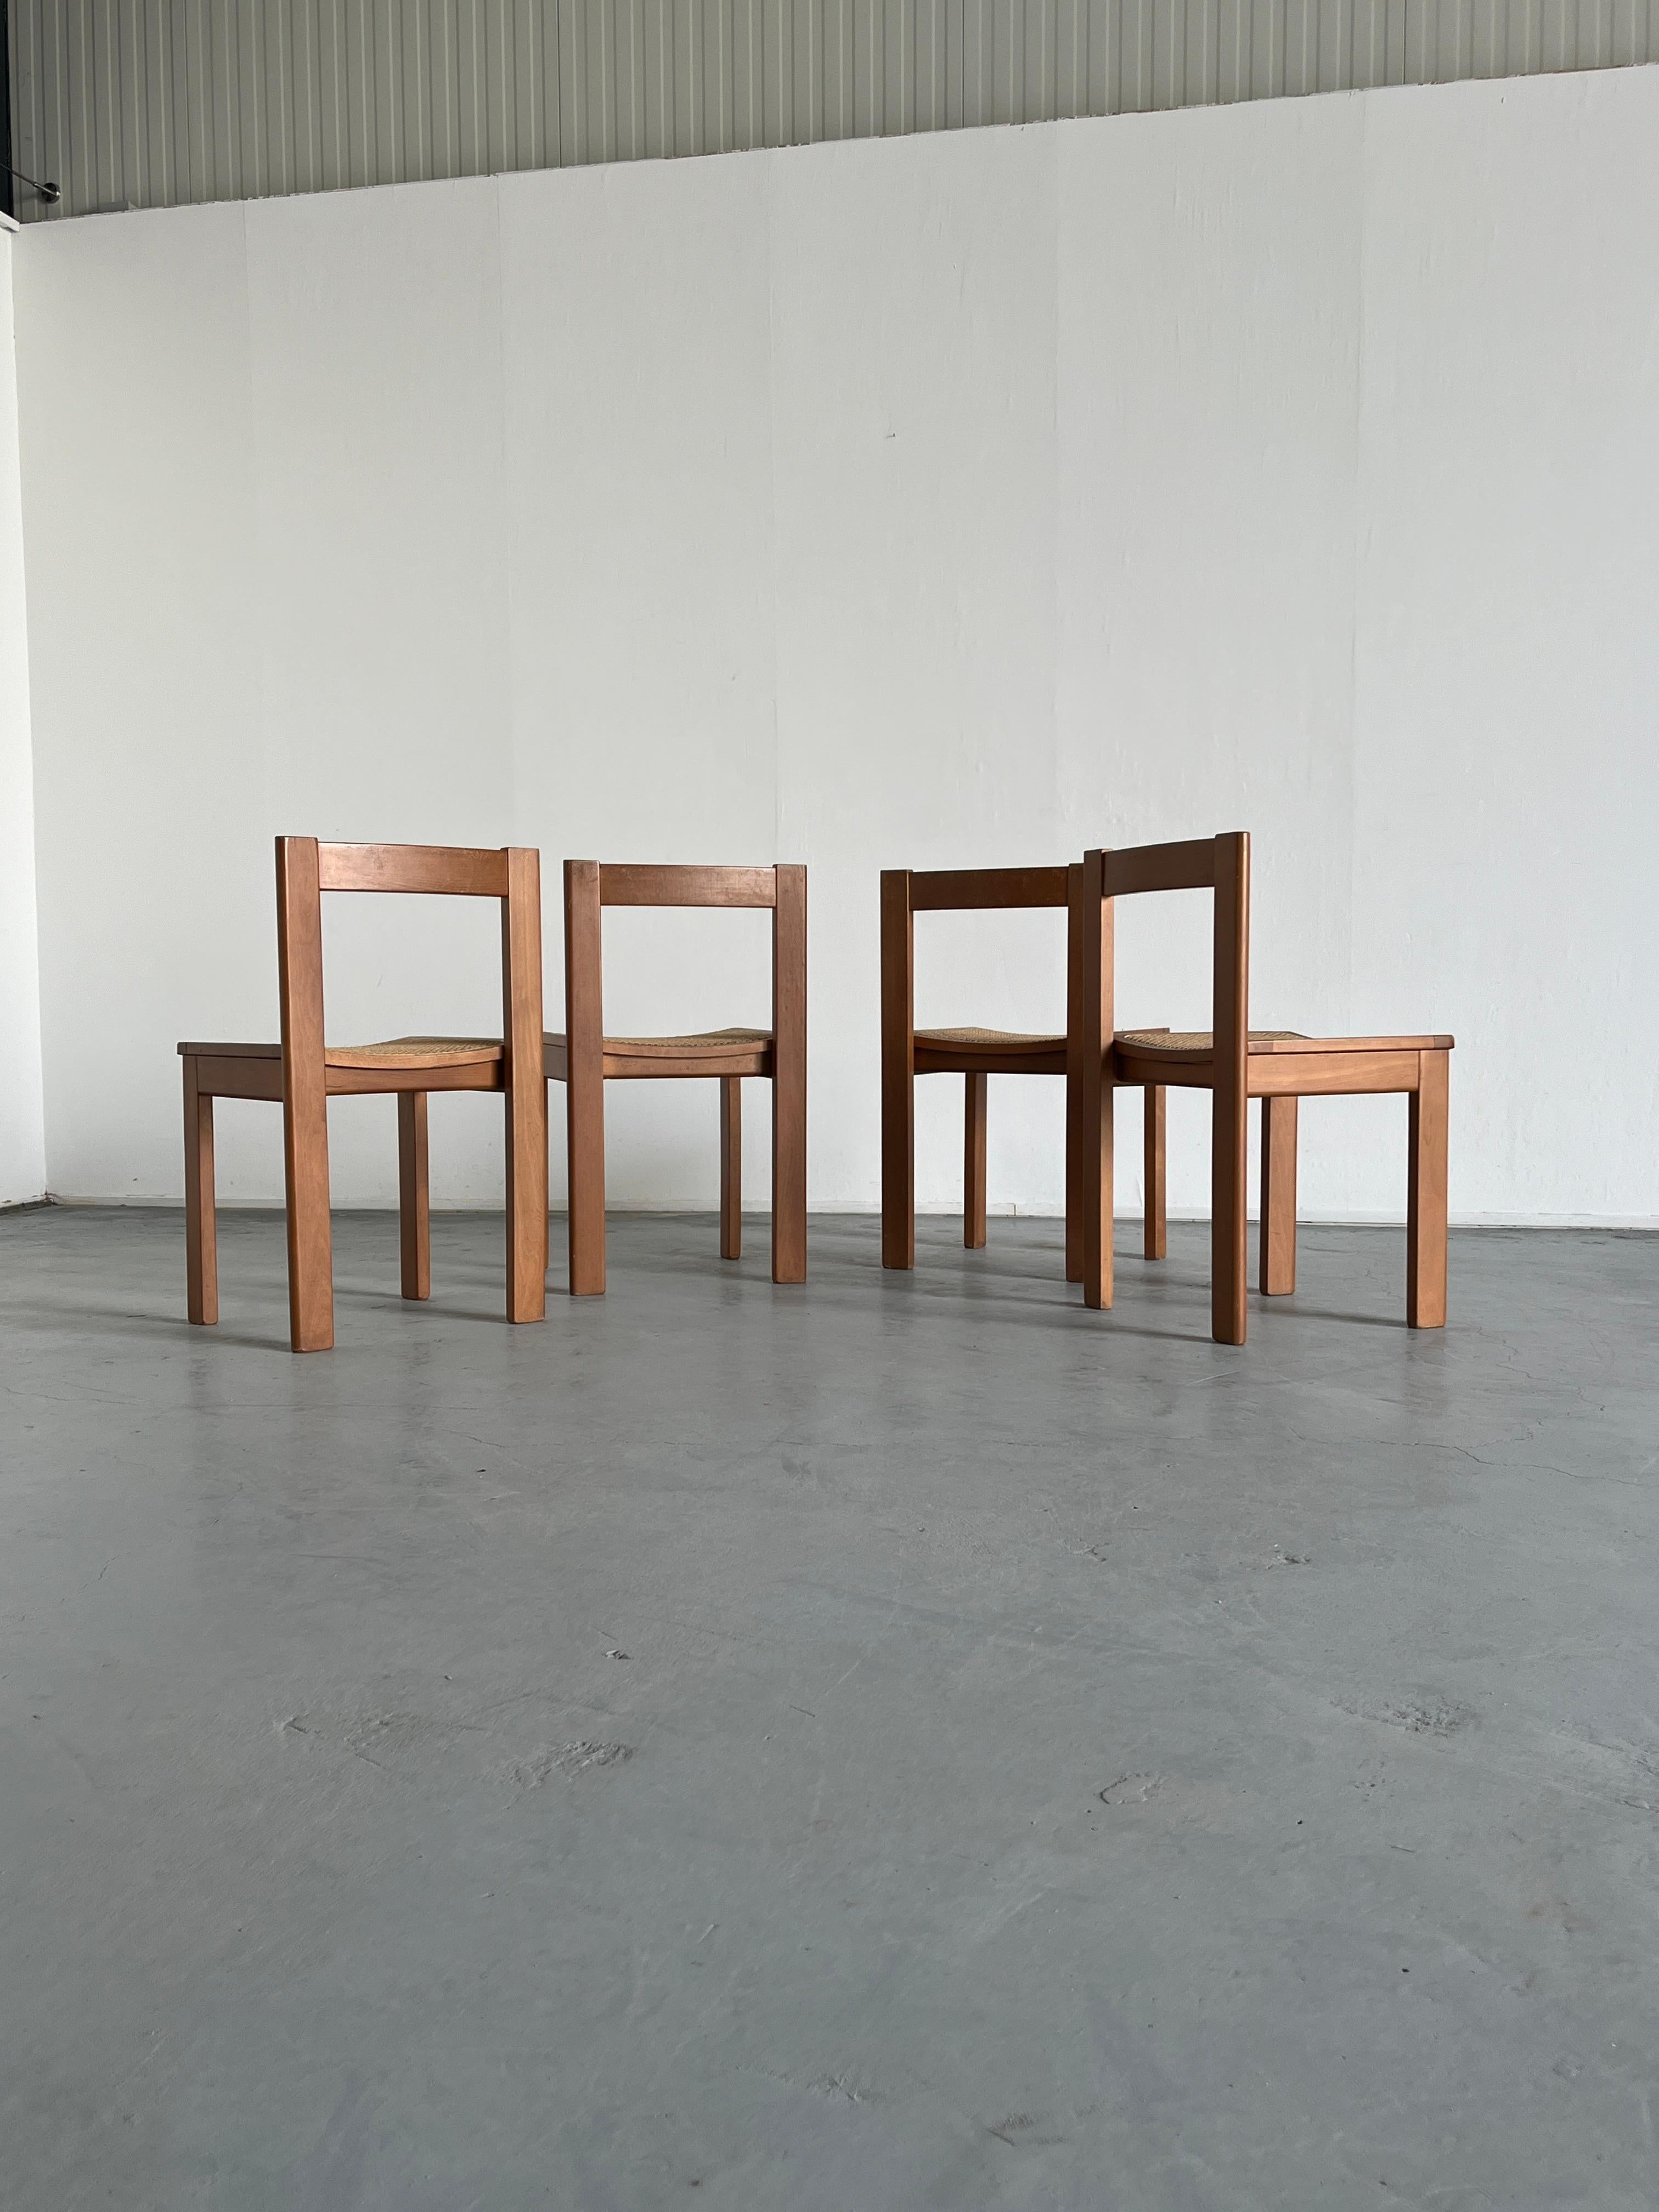 Cane Set of 4 Vintage Mid-Century Modern Constructivist Wooden Dining Chairs, 1960s For Sale